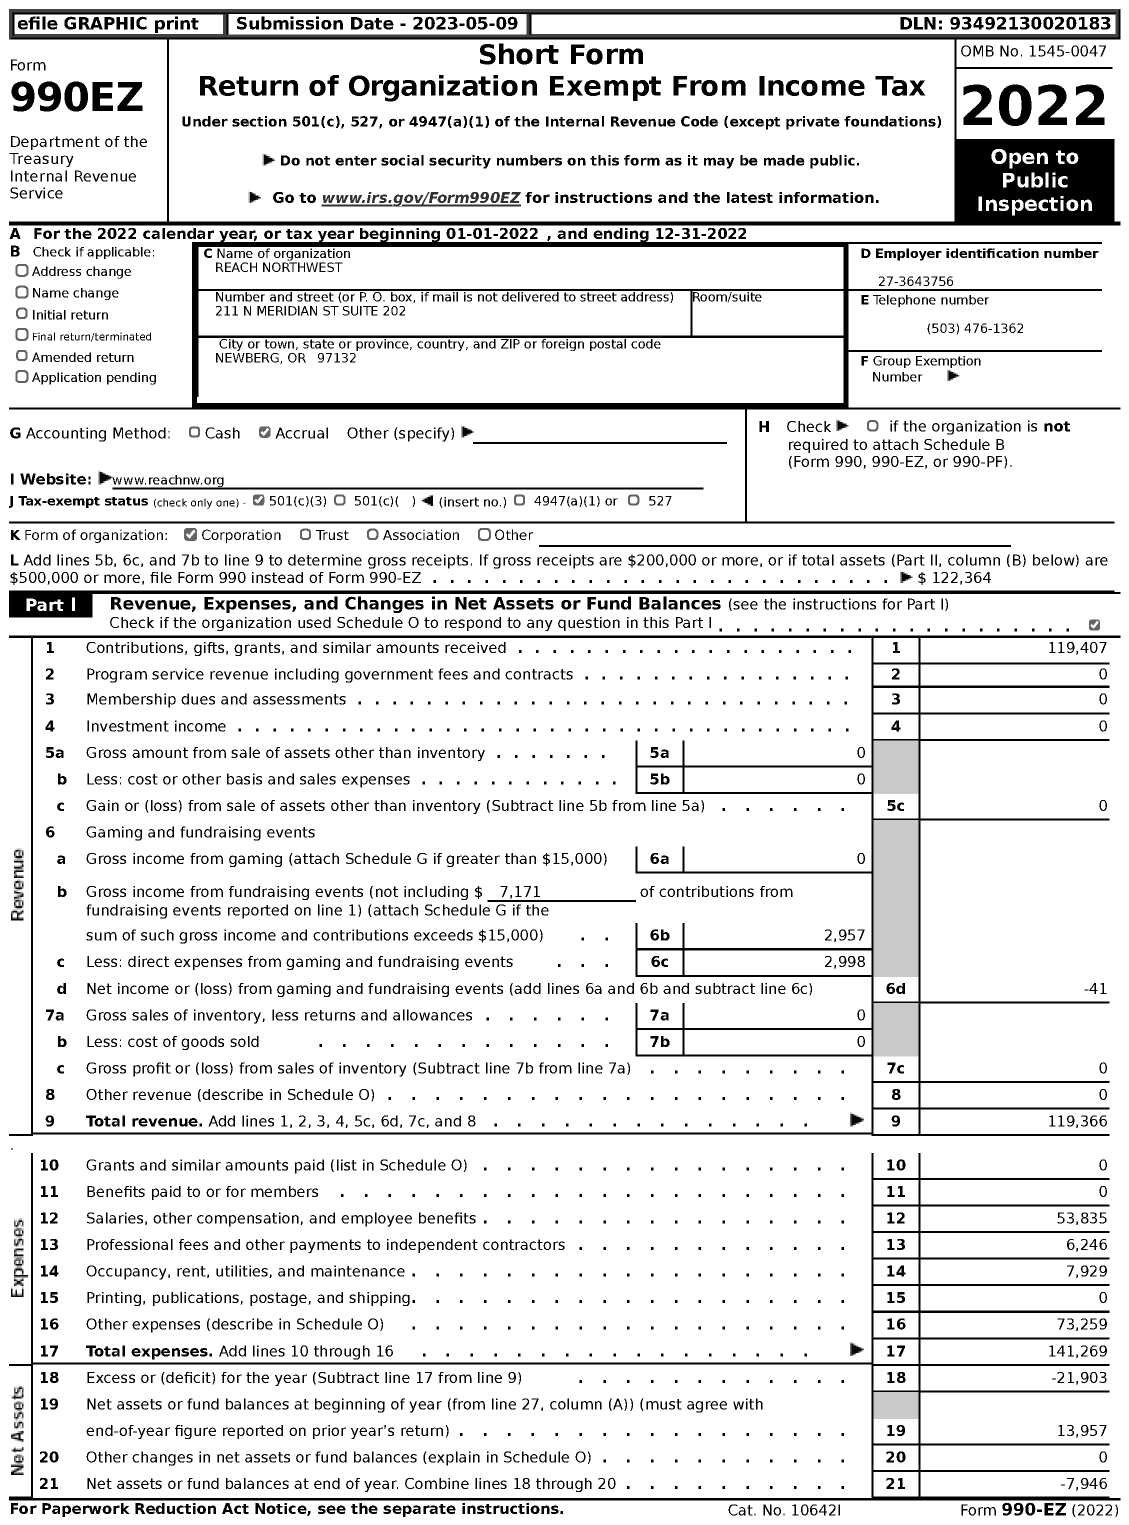 Image of first page of 2022 Form 990EZ for Reach Northwest